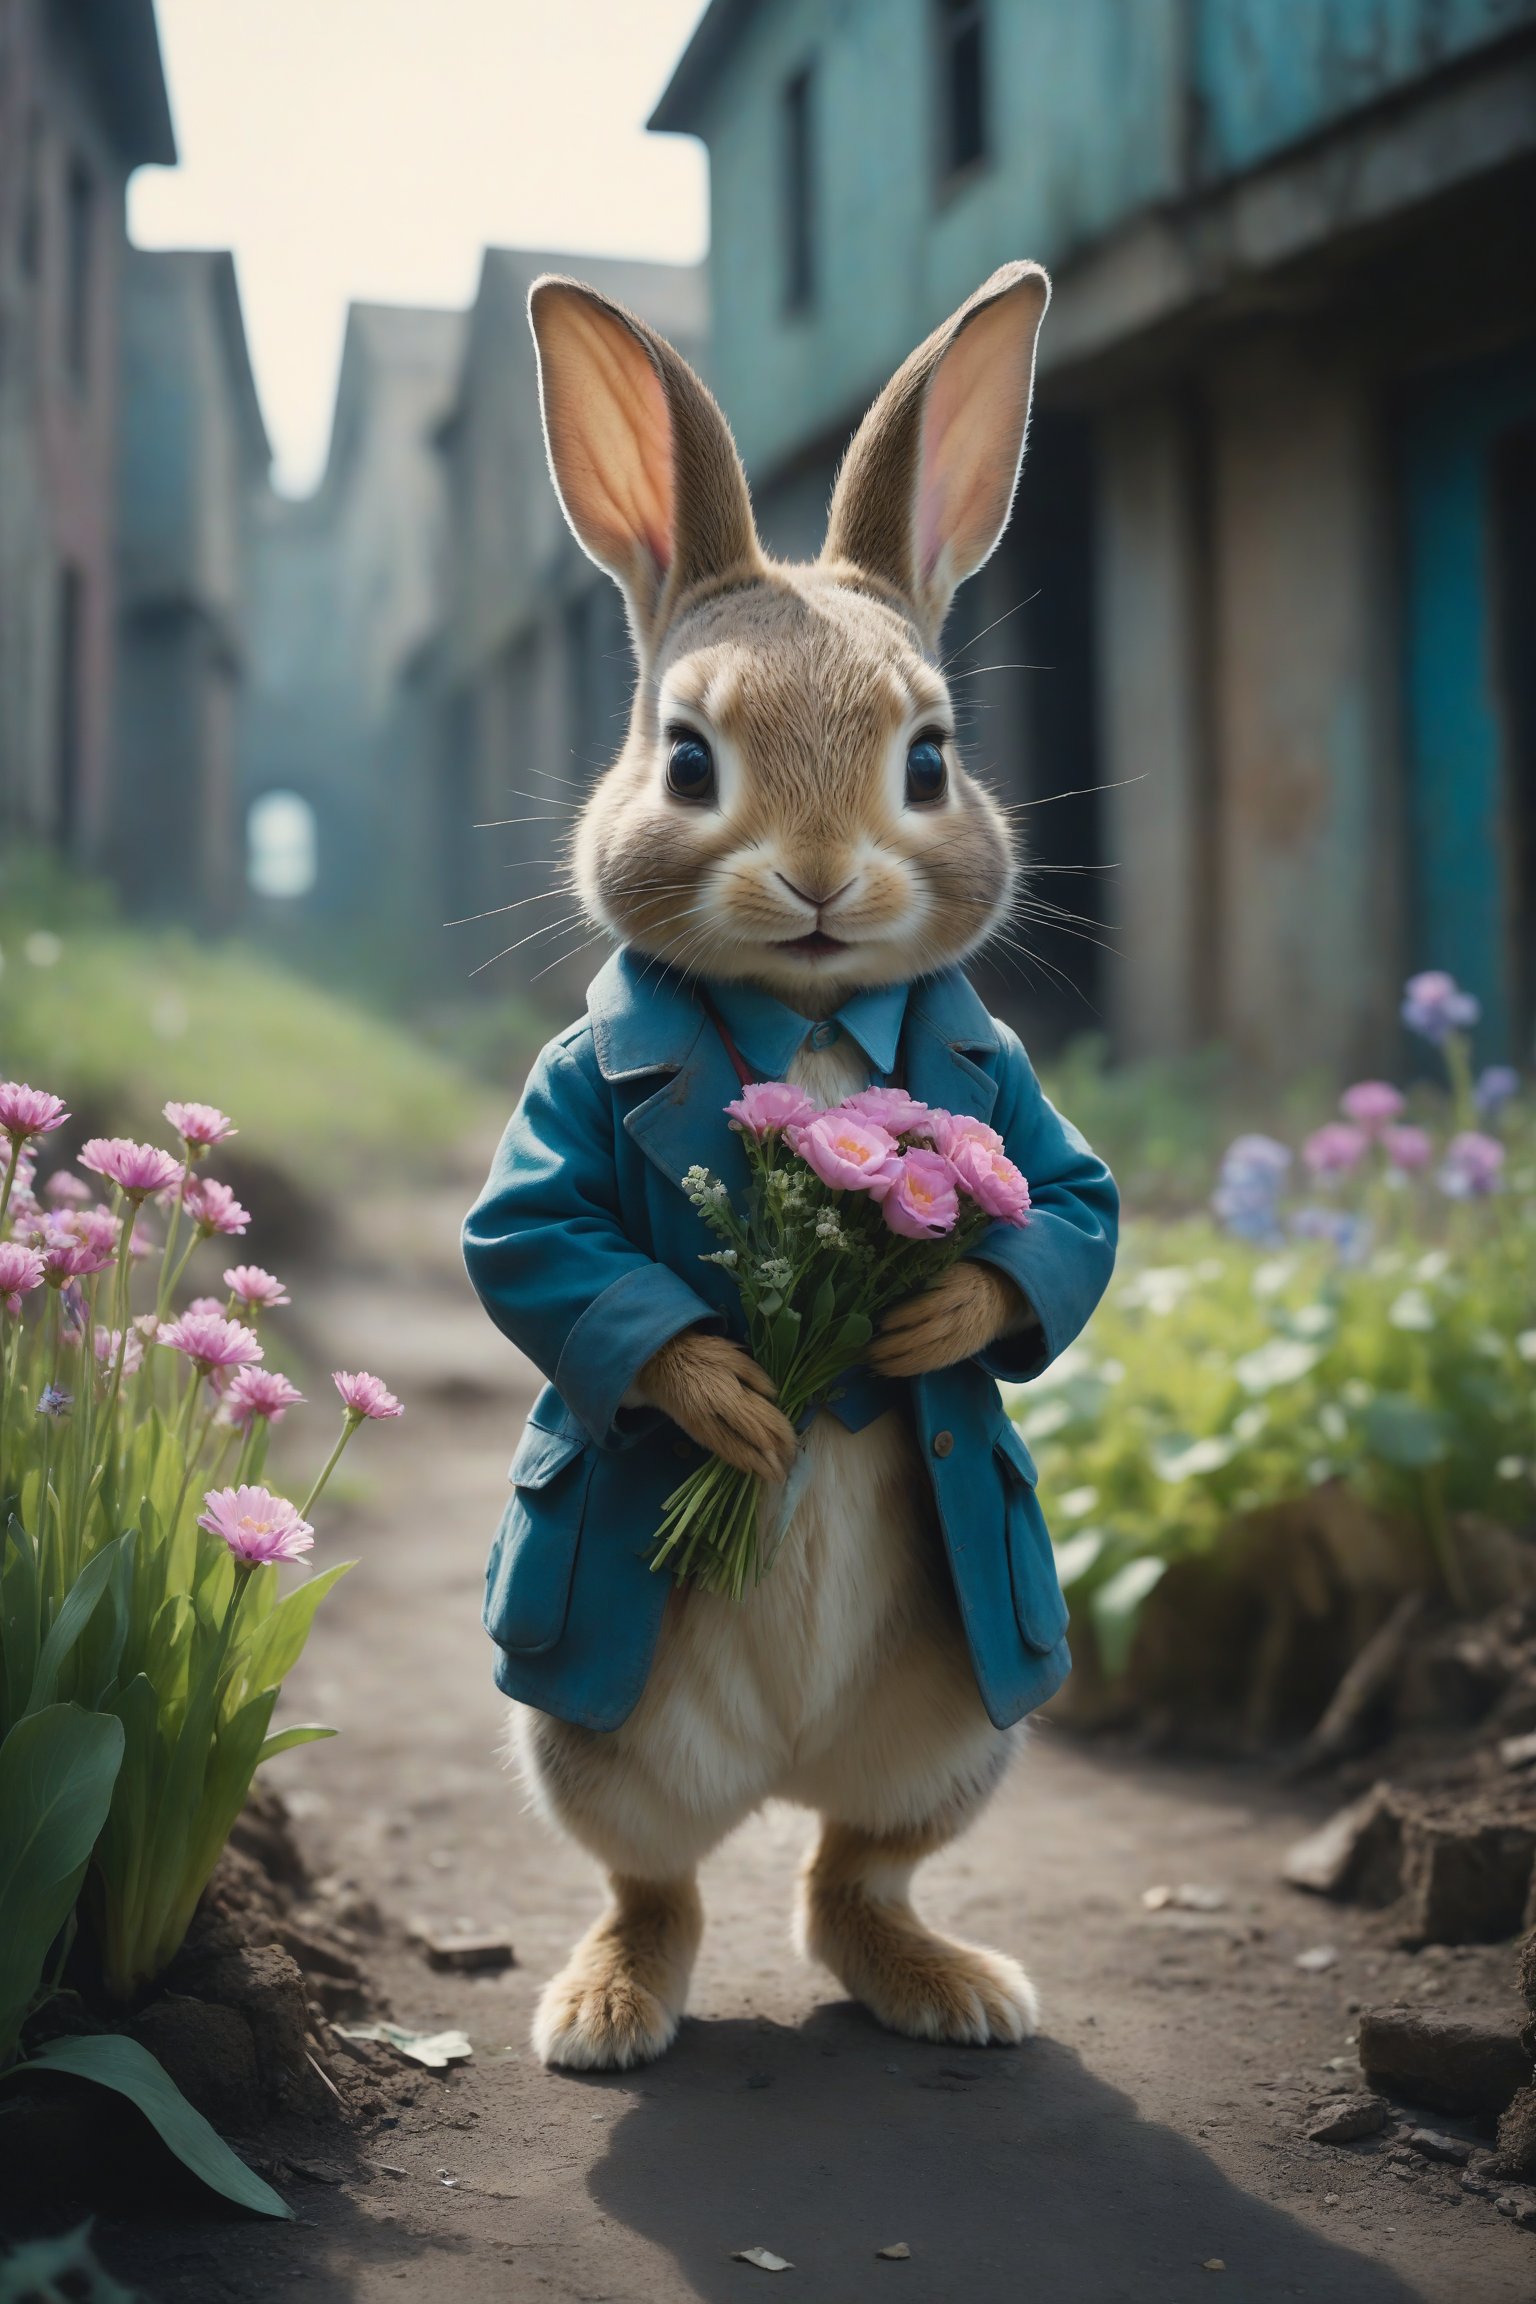 cinematic film still Photo cyberpunk Peter Rabbit Beatrix Potter, holding flowers. By Henry Cavill, Chibi style, cartoonish, they are in a rotten abandoned future city, landscape of pastel colors. . Vibrant, beautiful, painterly, detailed, textural, artistic . shallow depth of field, vignette, highly detailed, high budget, bokeh, cinemascope, moody, epic, gorgeous, film grain, grainy